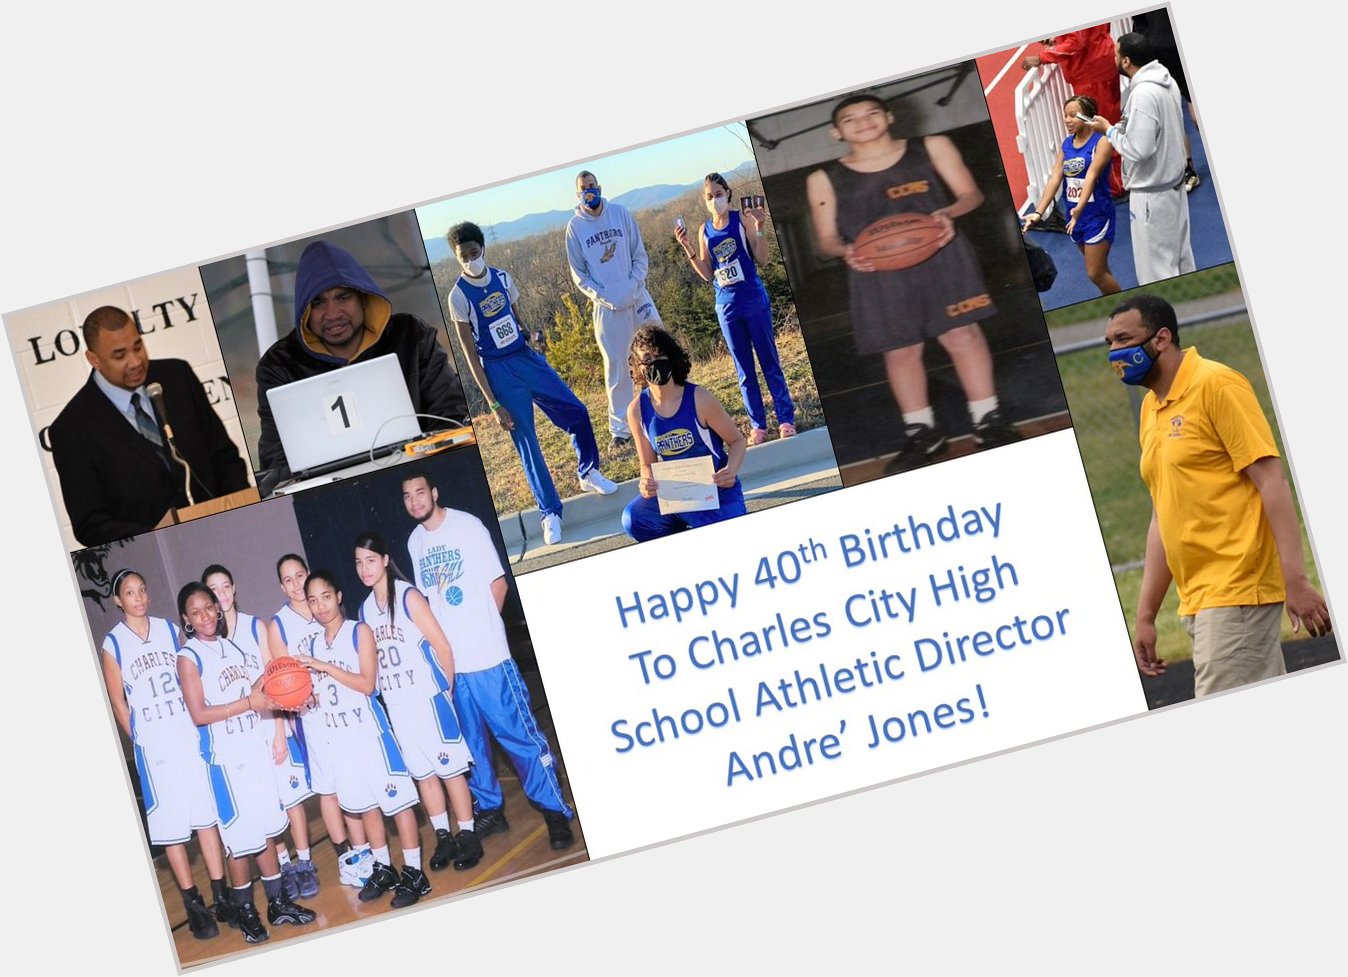 A happy 40th birthday goes out to Charles City High School Athletic Director Andre\ Jones! 